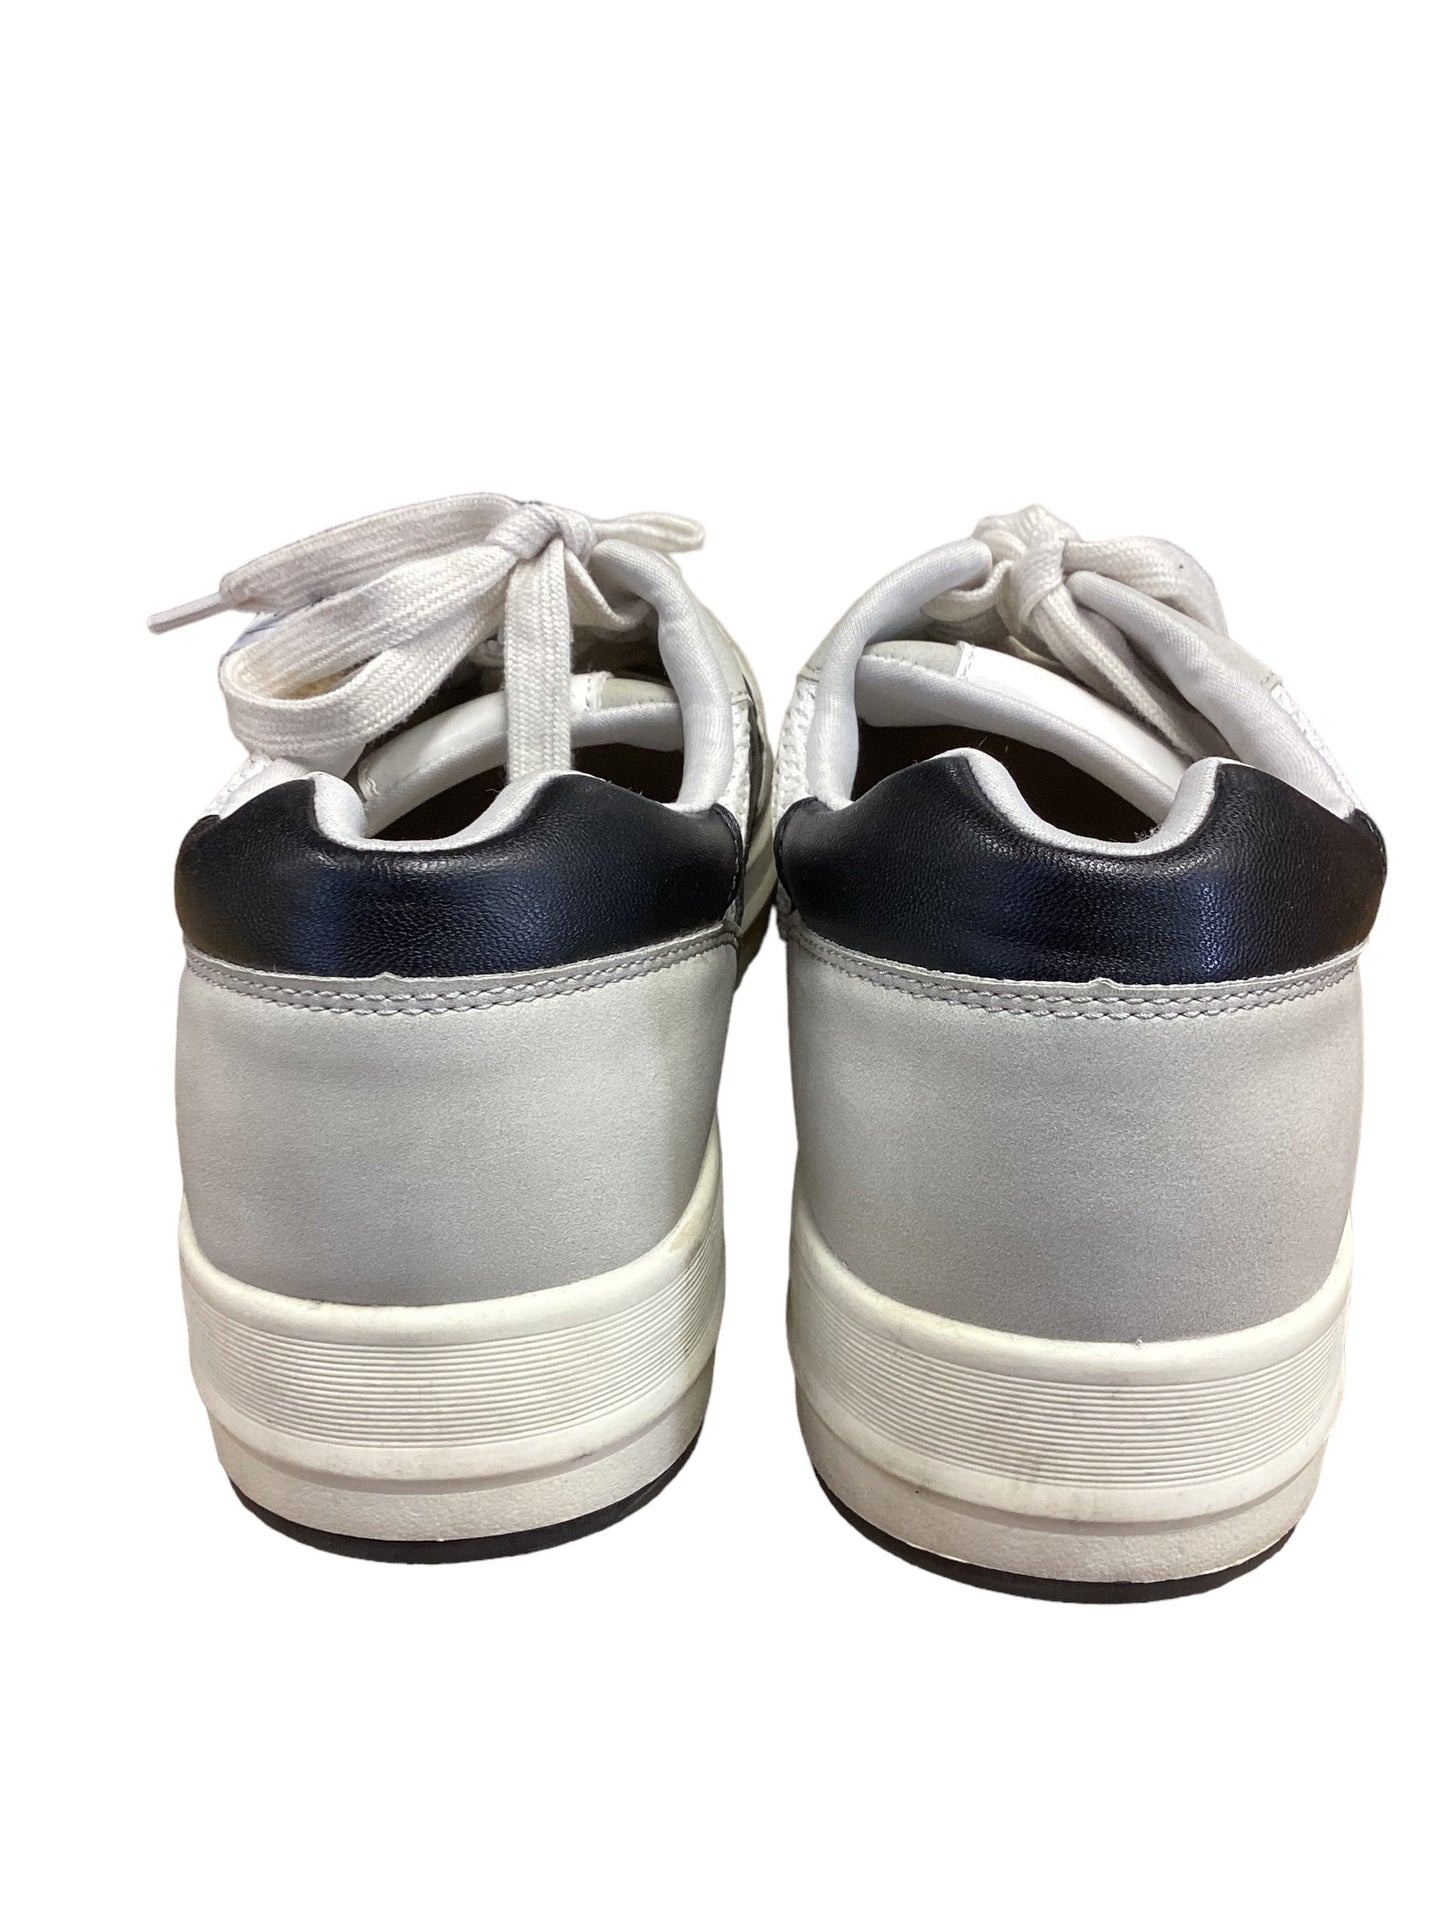 Grey & White Shoes Sneakers Time And Tru, Size 8